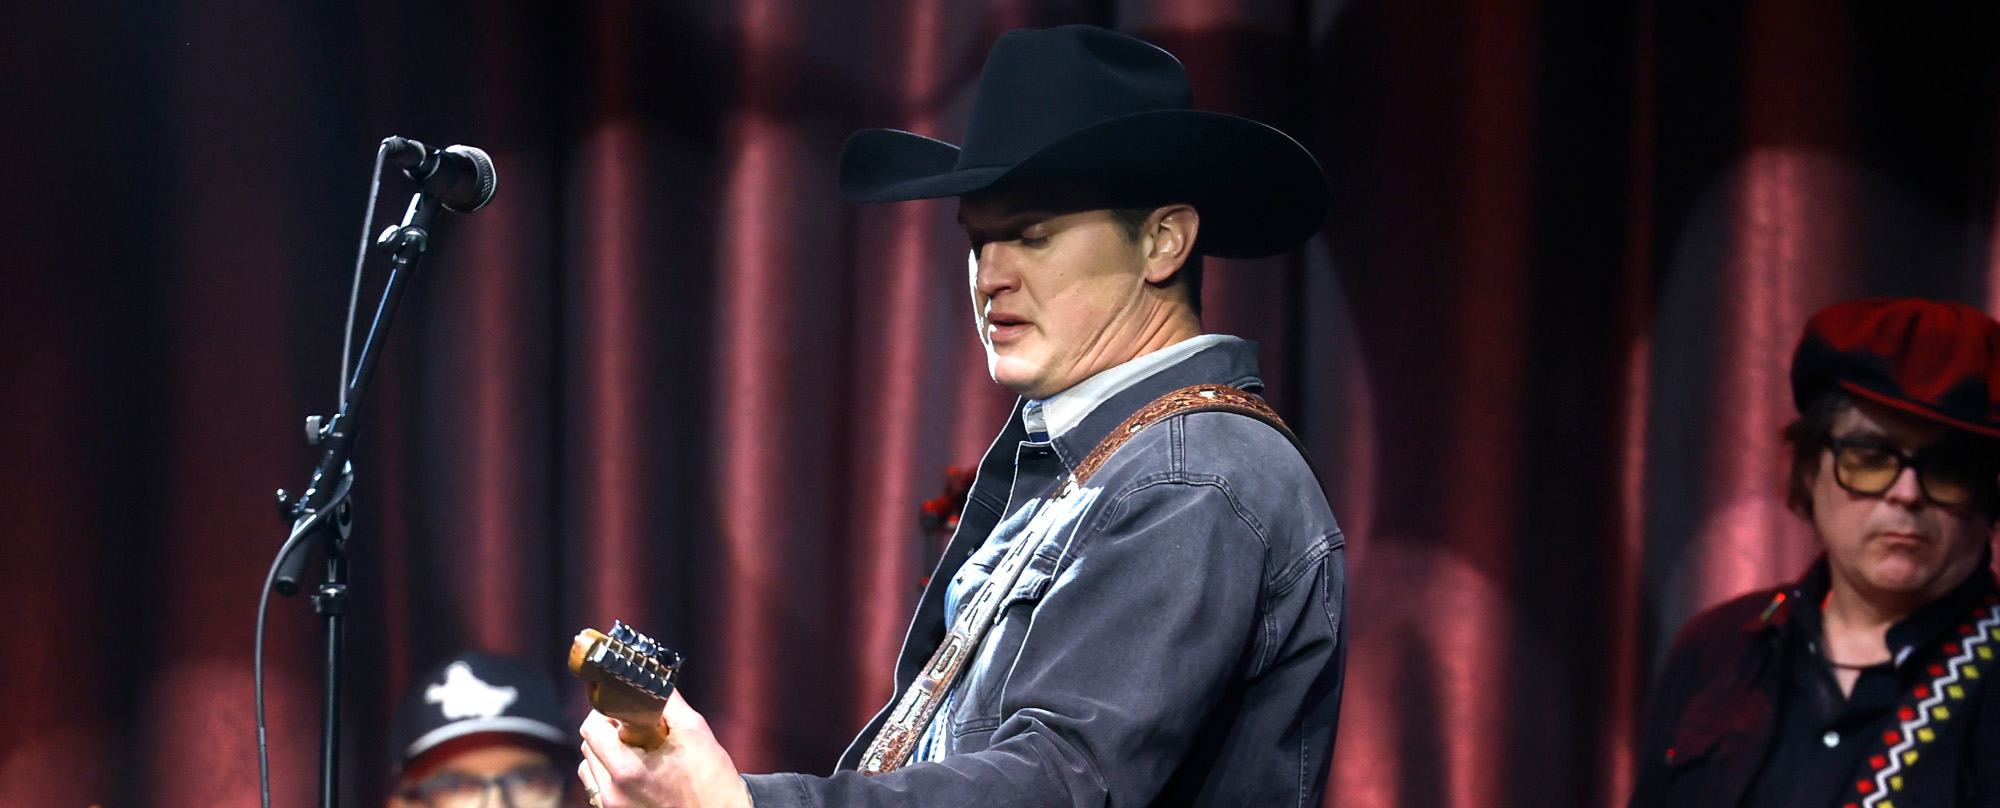 4 Hit Songs You Didn’t Know Jon Pardi Had a Hand in Writing